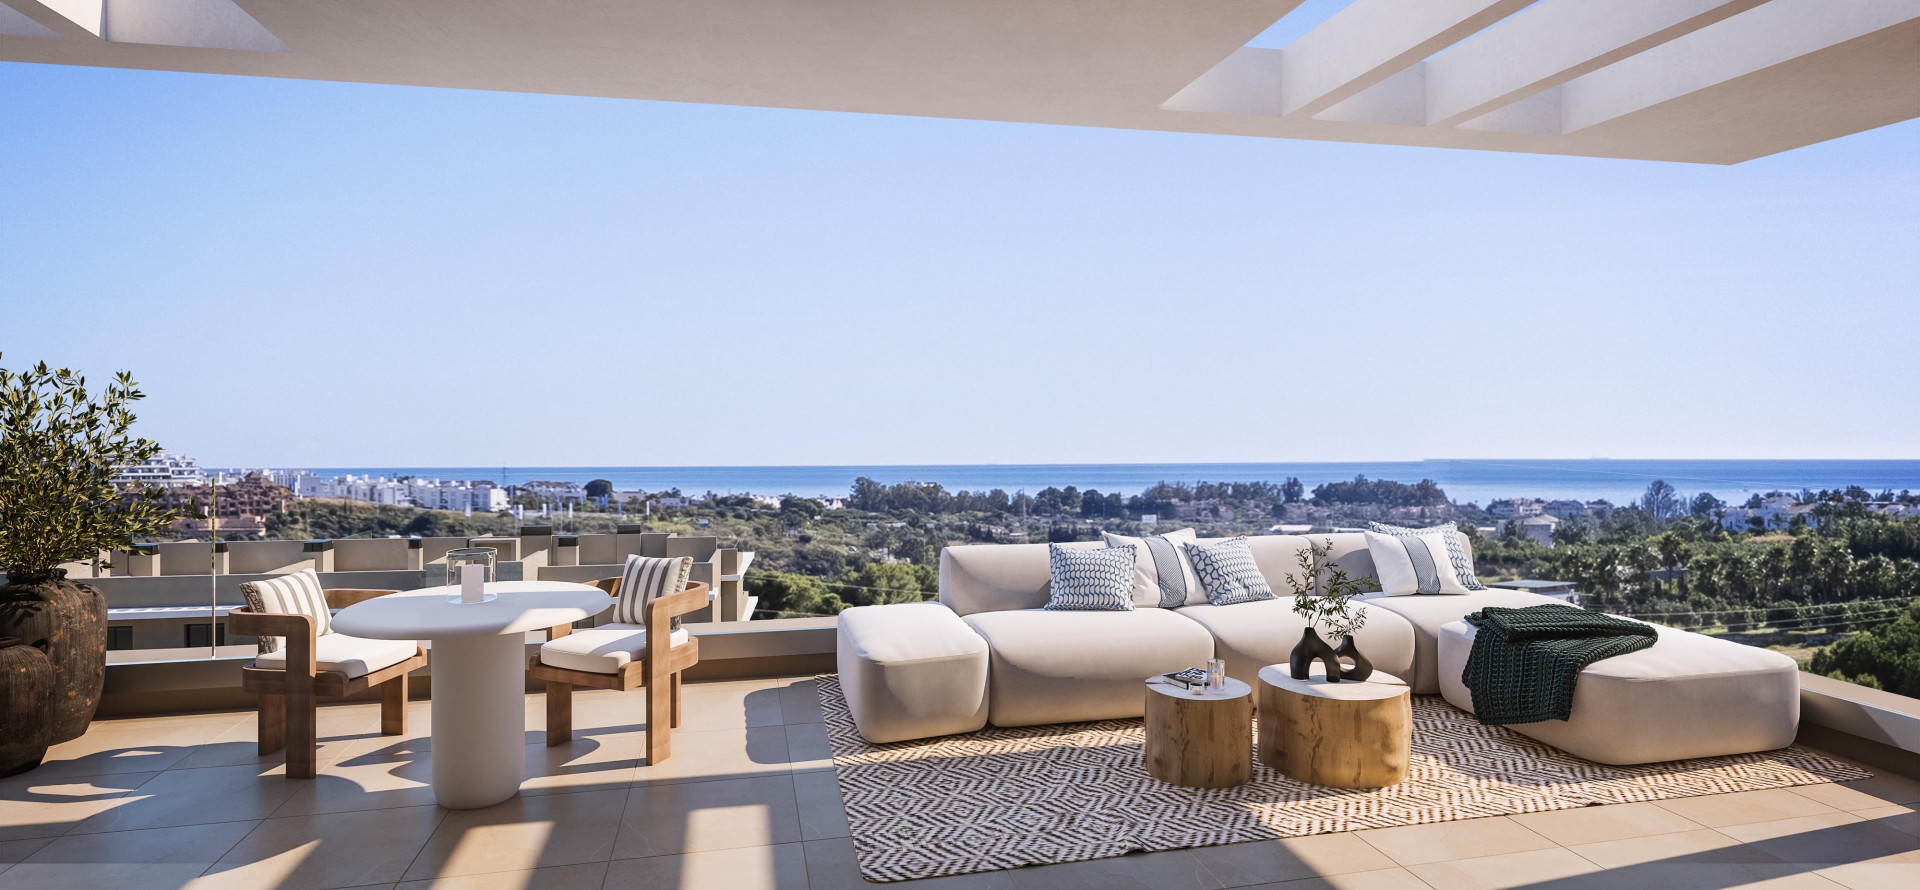 Avant-garde design penthouse with solarium overlooking the mountains and the coast of Estepona.